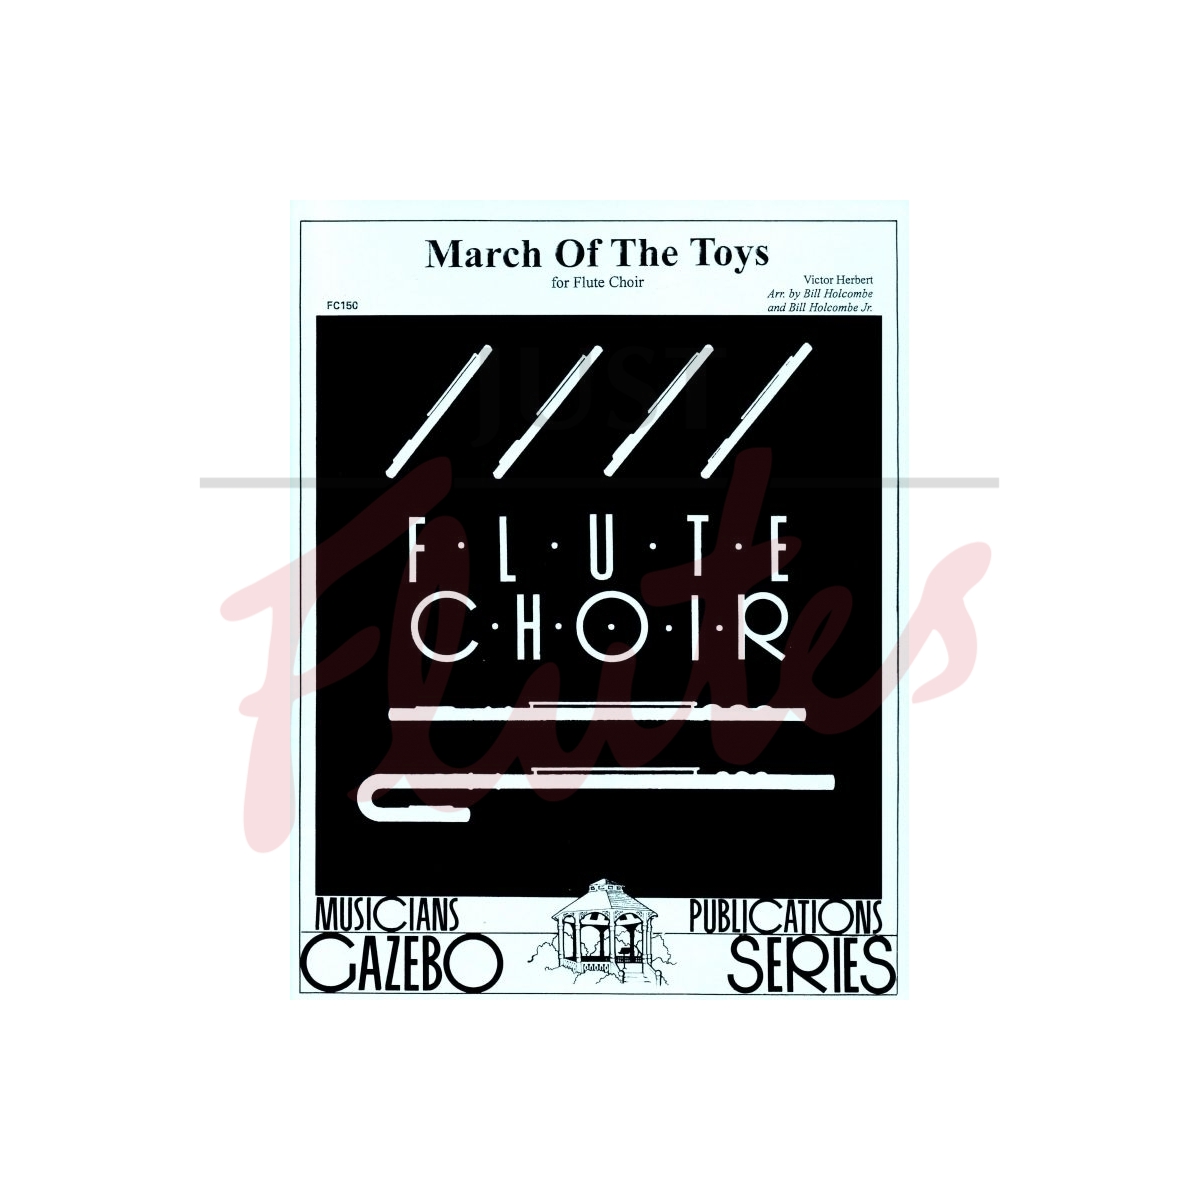 March of the Toys [Flute Choir]